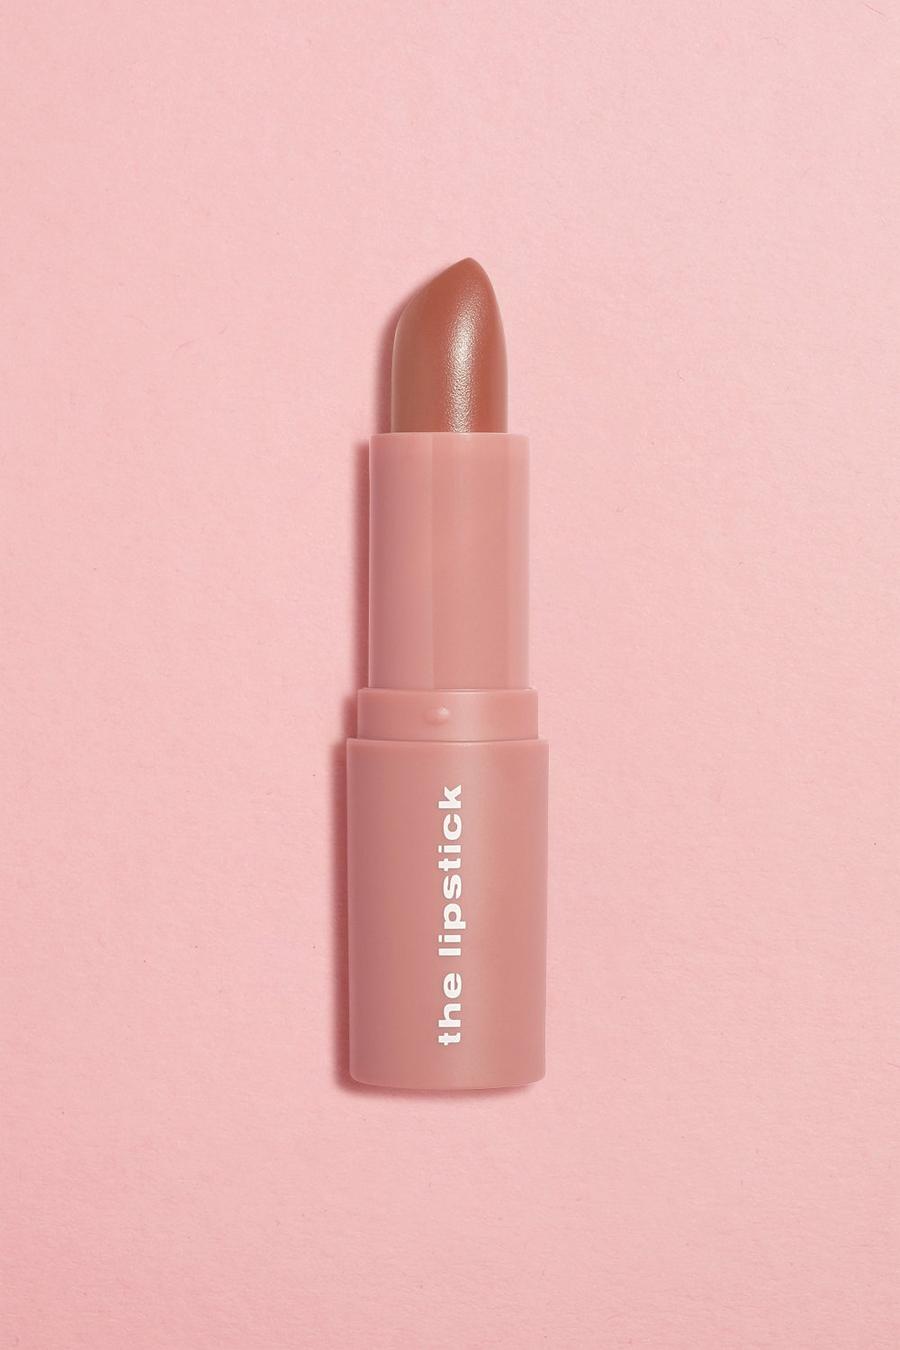 Boohoo Beauty - Rossetto The Lipstick - Pale Nude image number 1